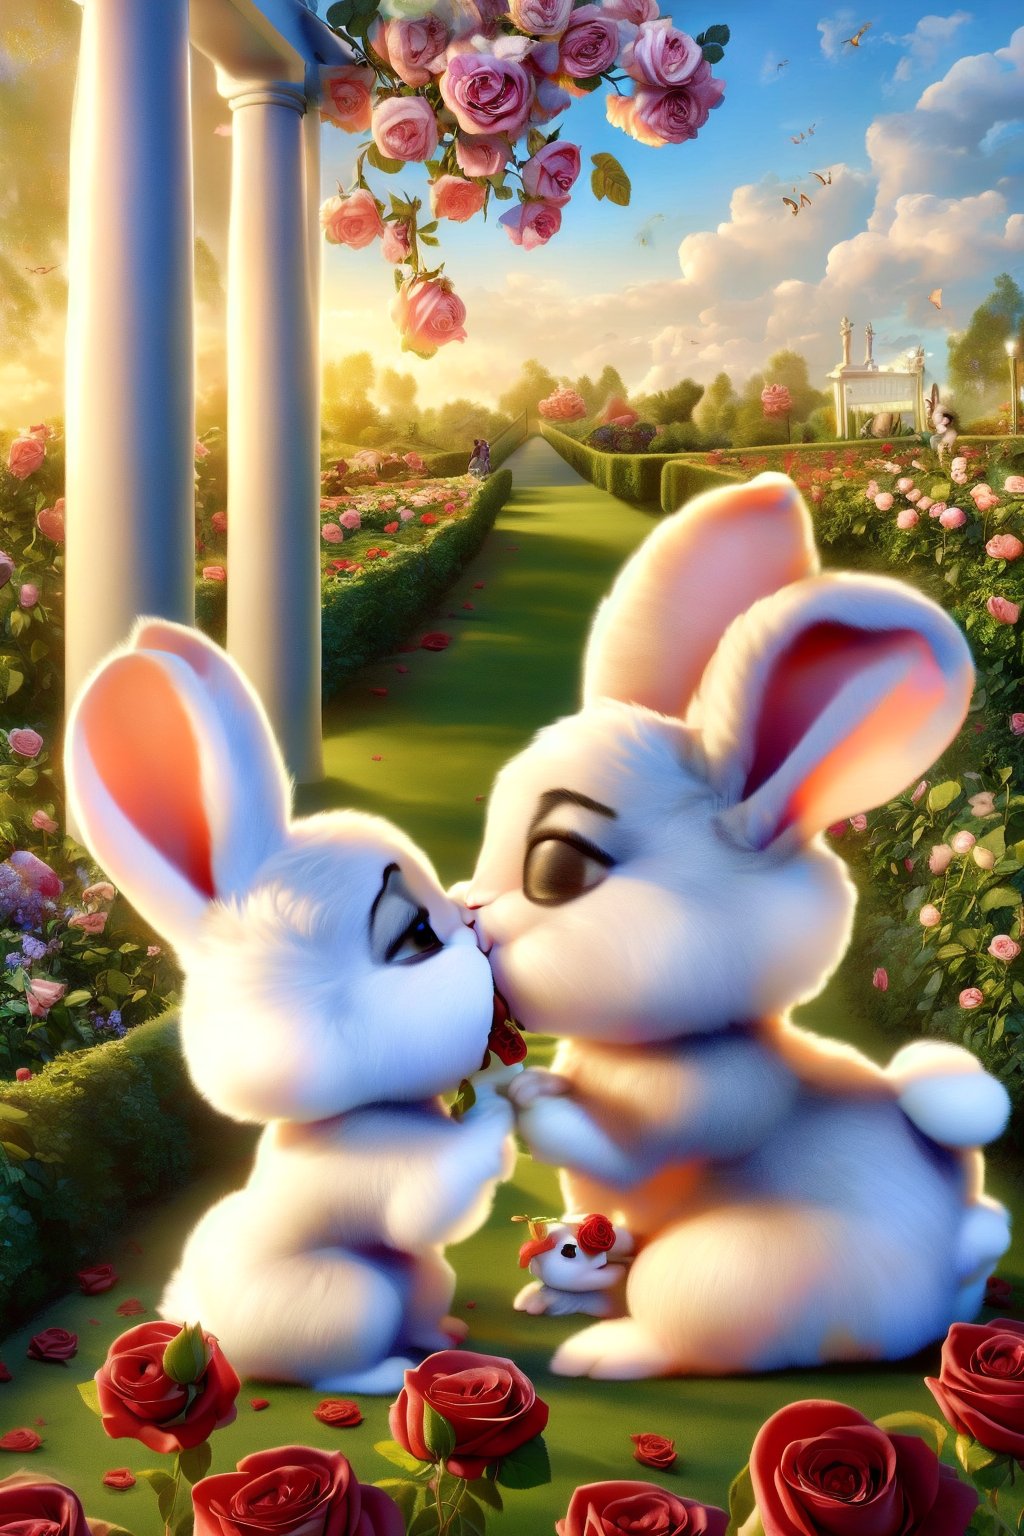 2 rabbits,eat flowers,in the beautiful rose garden